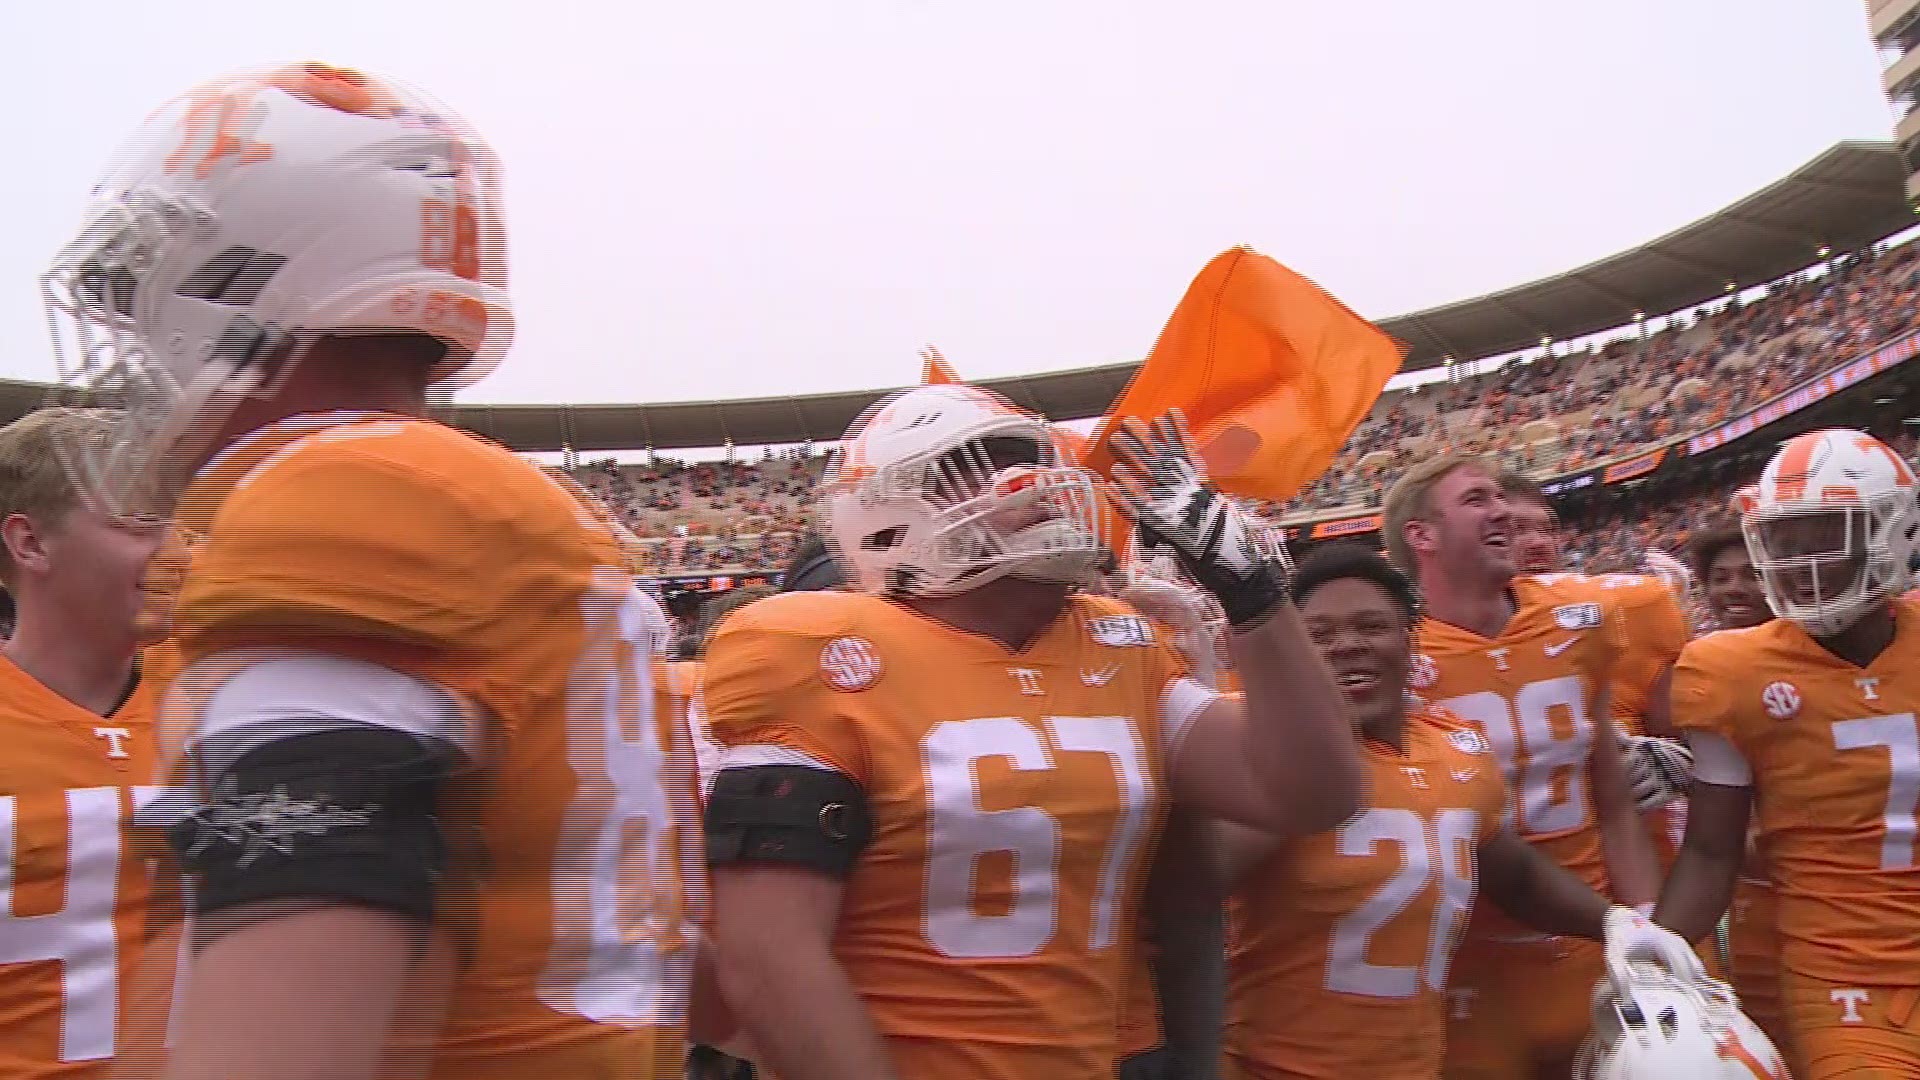 The Vols celebrate their first SEC win of the season and the students sing Rocky Top.